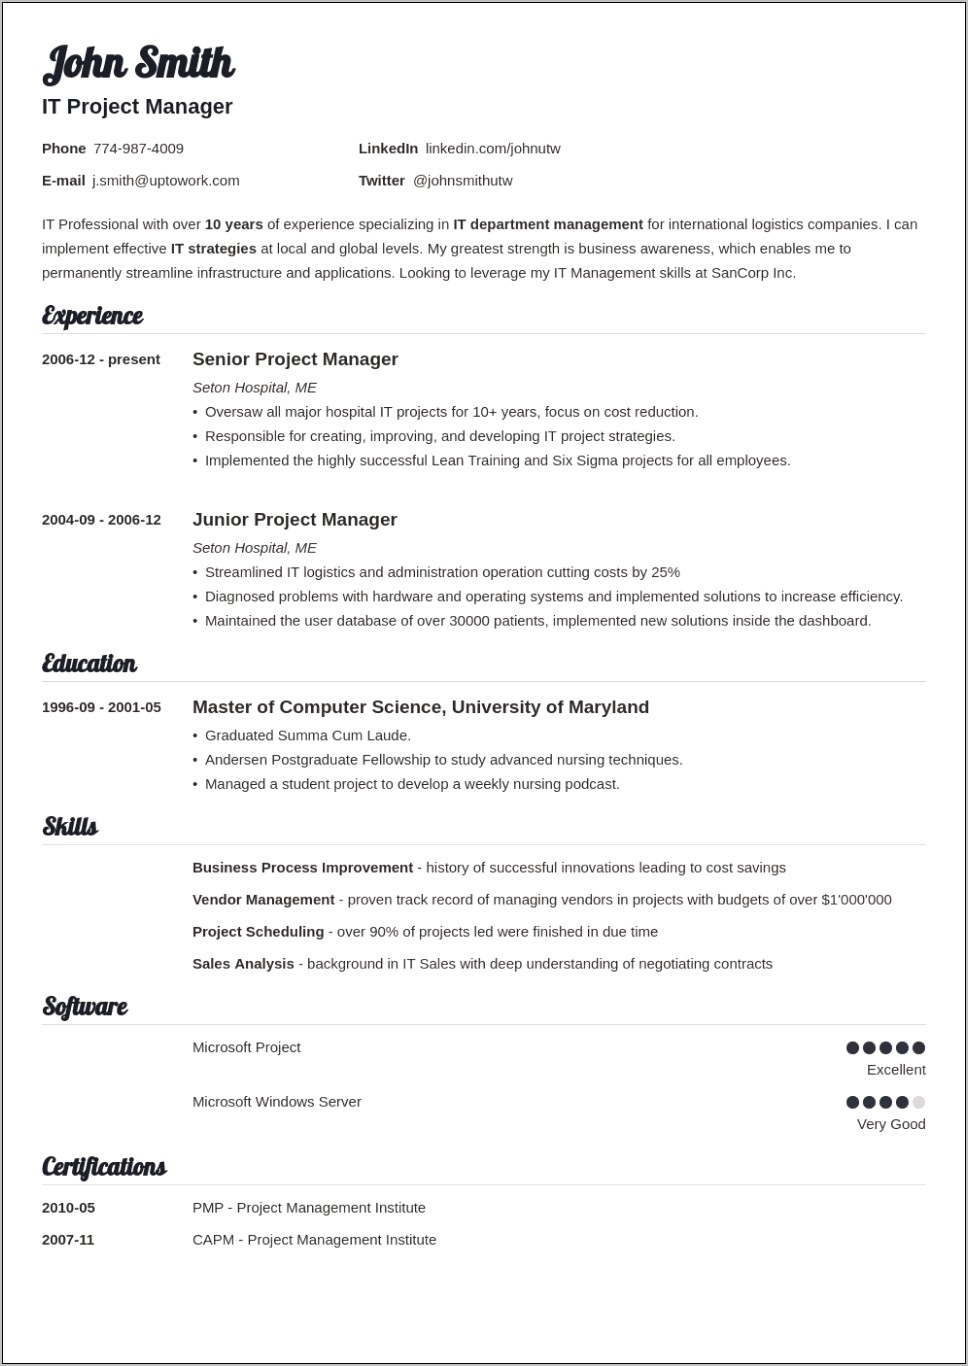 Examples Of Resumes For Certain Jobs